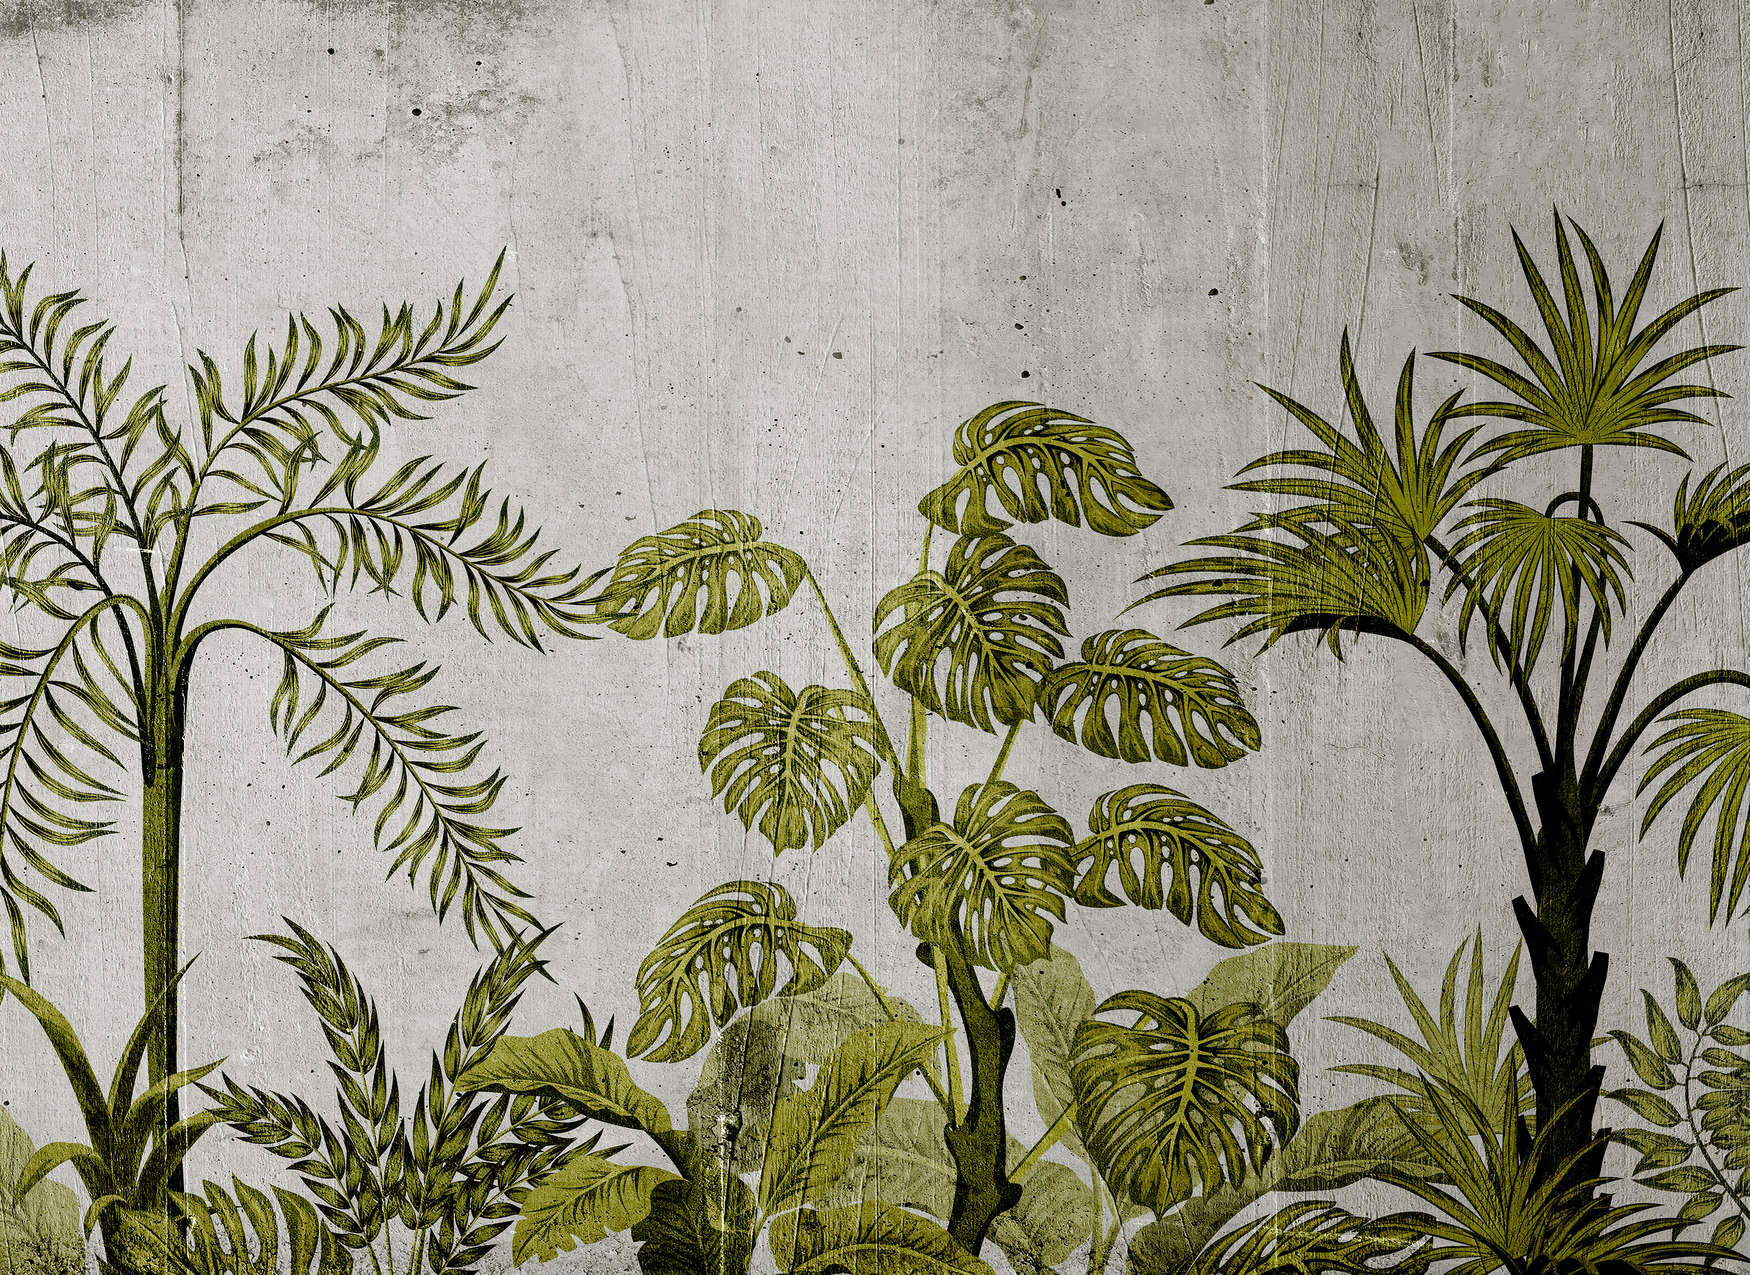             Photo wallpaper with jungle motif on concrete background - green, grey
        